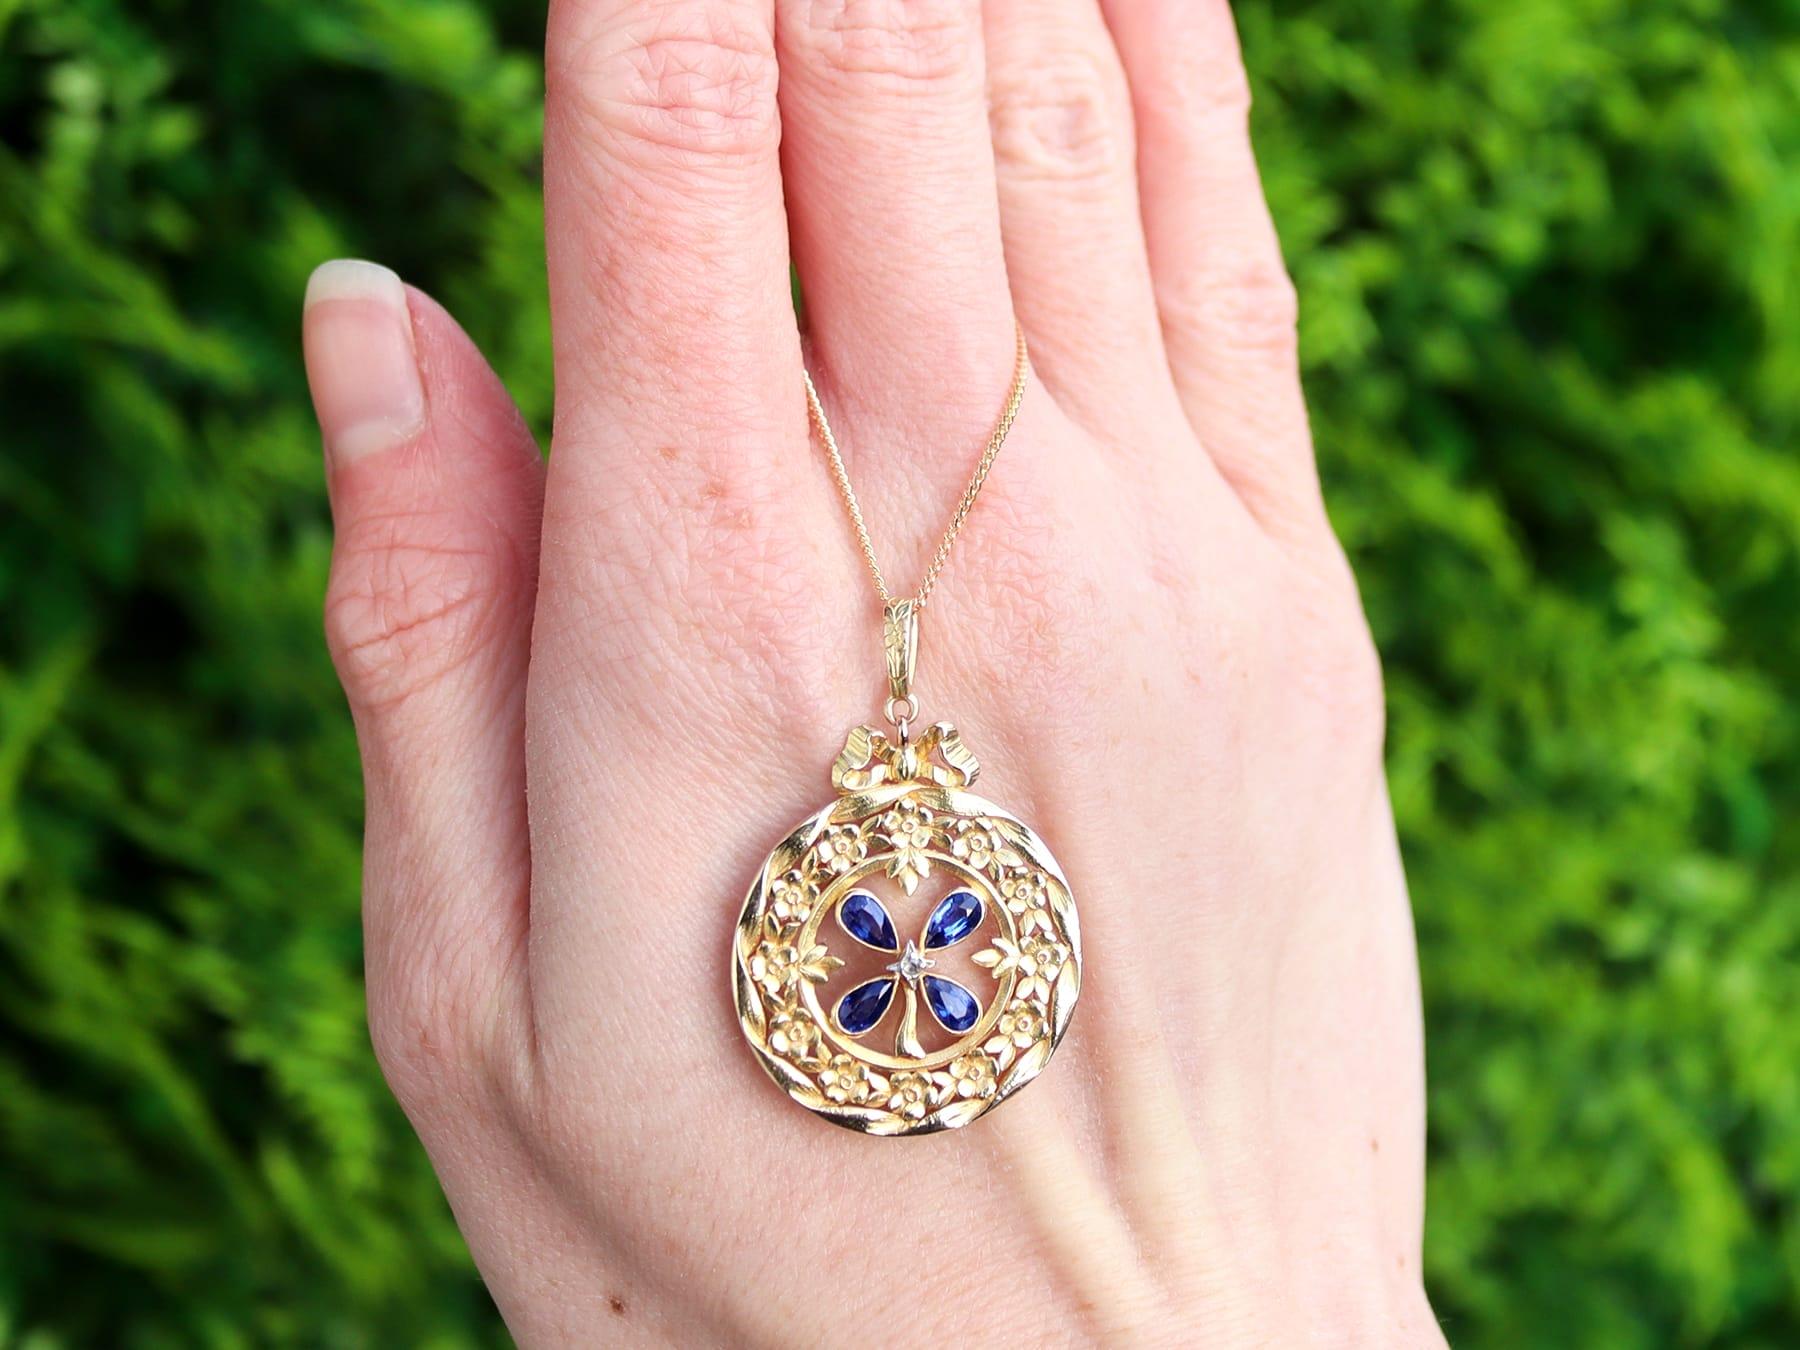 A stunning, fine and impressive antique 0.98 carat blue sapphire and 0.01 carat diamond, 18 karat yellow gold pendant; part of our antique jewellery and estate jewelry collections.

This stunningantique pendant has been crafted in 18K yellow gold